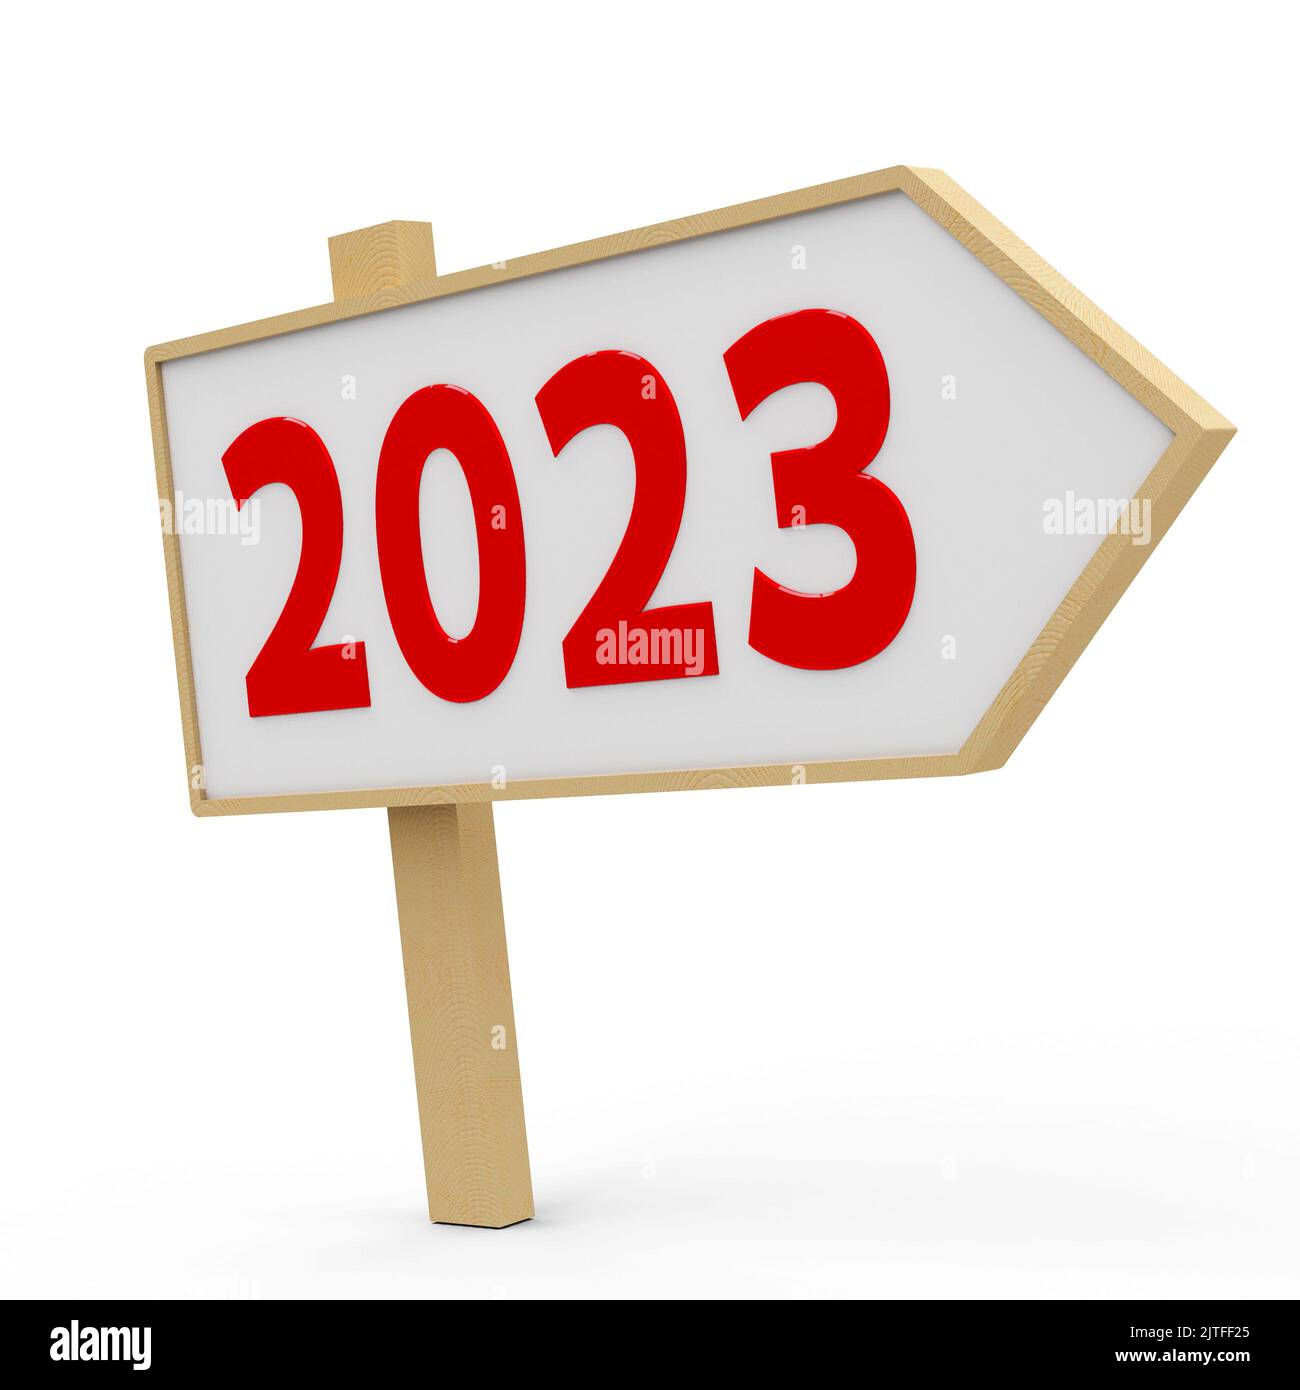 2023 white banner on white background, represents the new year 2023, three-dimensional rendering, 3D illustration Stock Photo